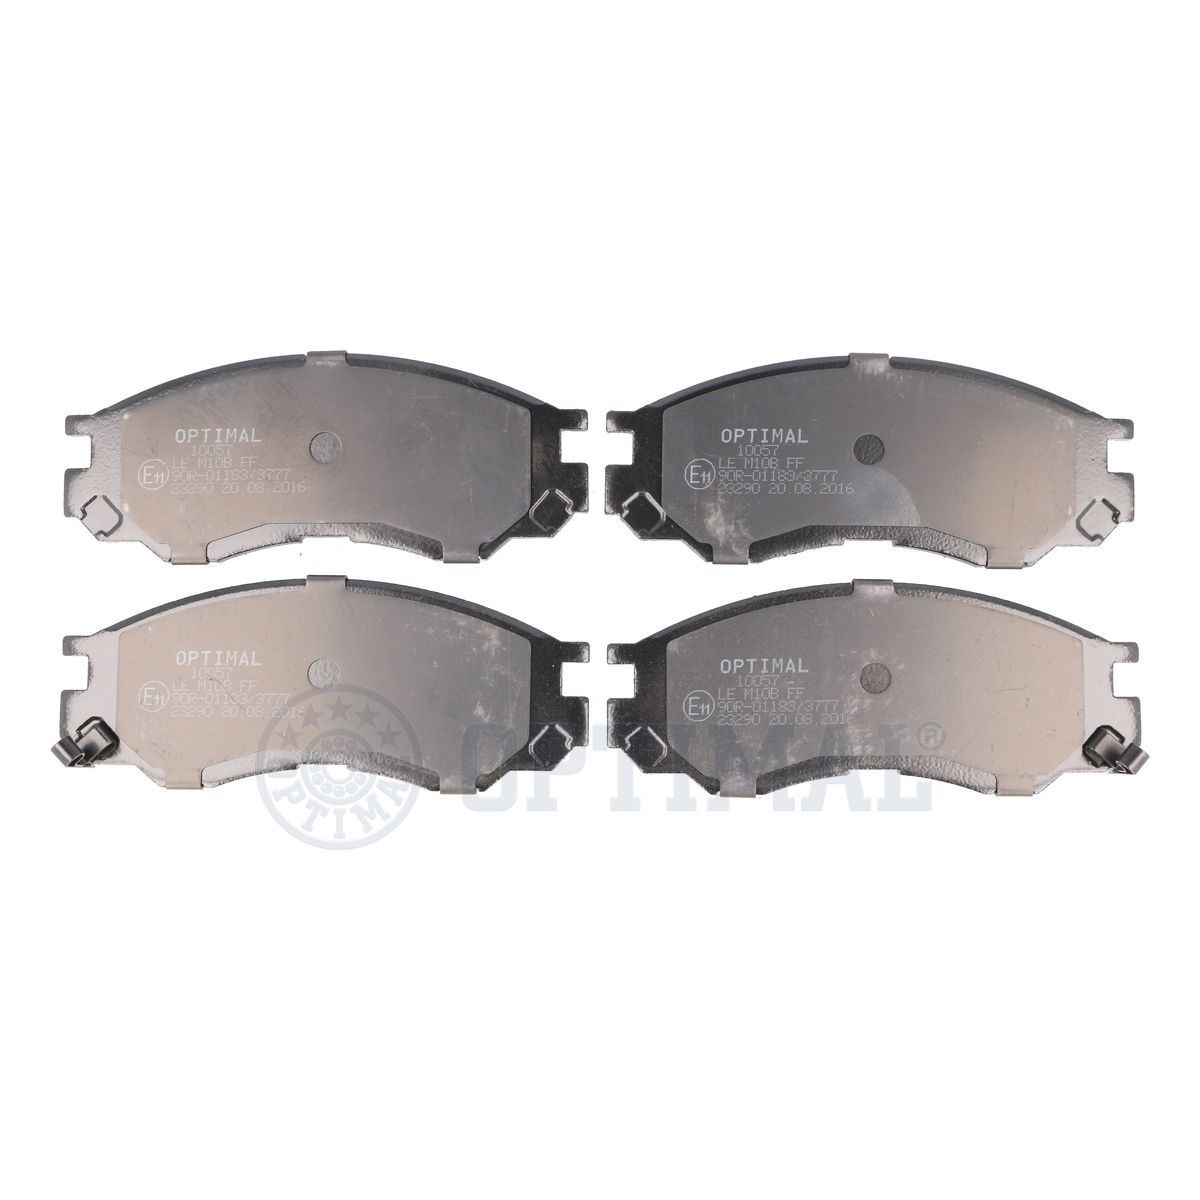 OPTIMAL BP-10057 Brake pad set Front Axle, with acoustic wear warning